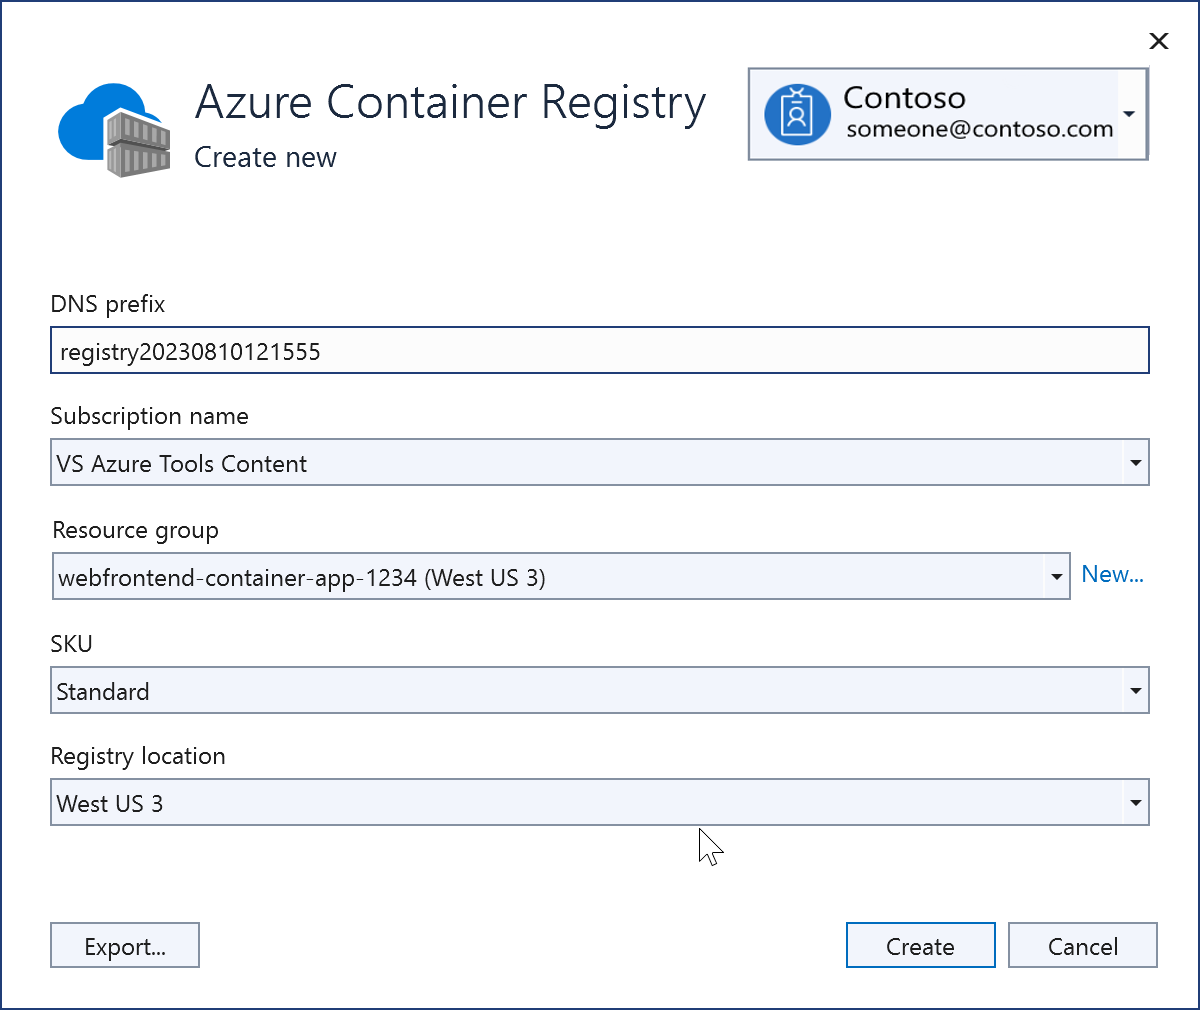 Screenshot showing a new Azure container registry that was just created.